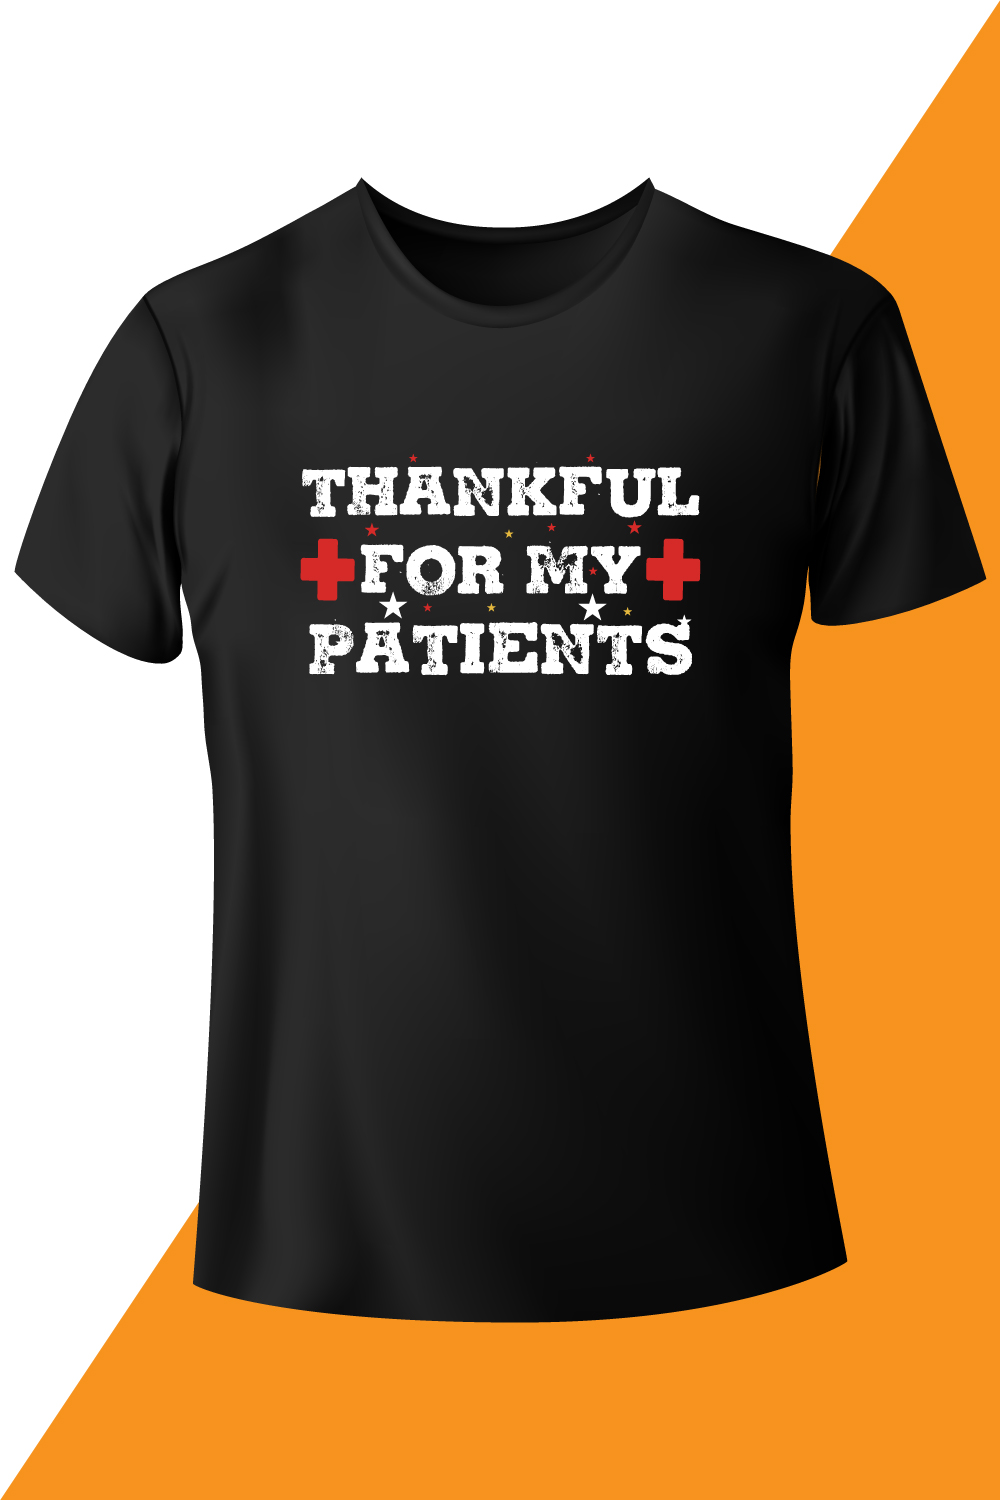 Image of a black T-shirt with a wonderful inscription thankful for my patients.